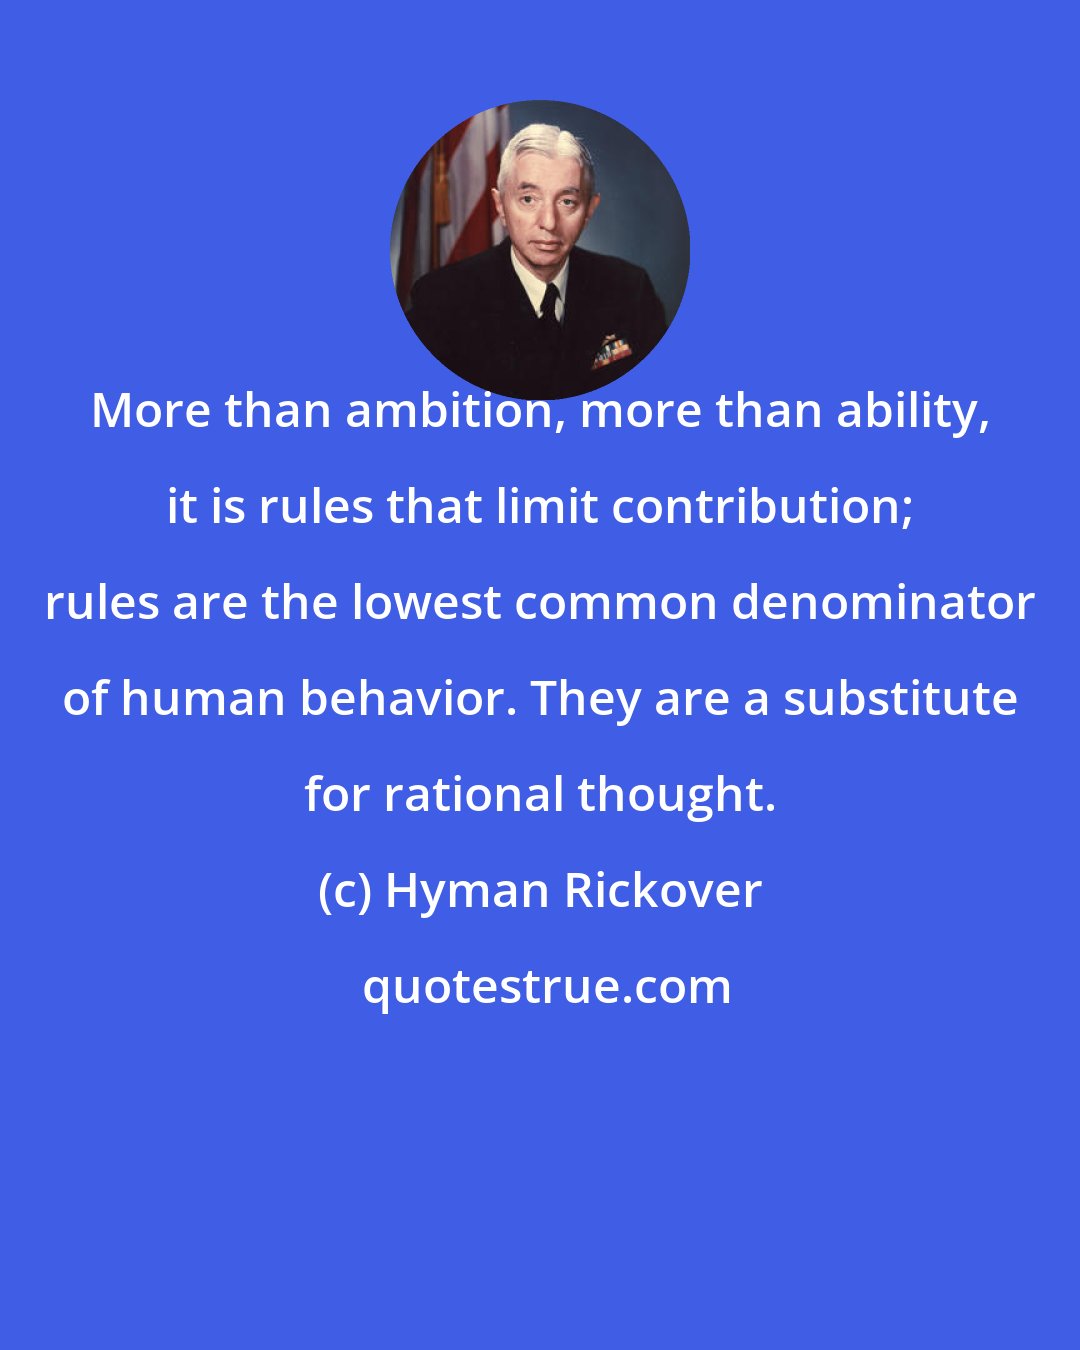 Hyman Rickover: More than ambition, more than ability, it is rules that limit contribution; rules are the lowest common denominator of human behavior. They are a substitute for rational thought.